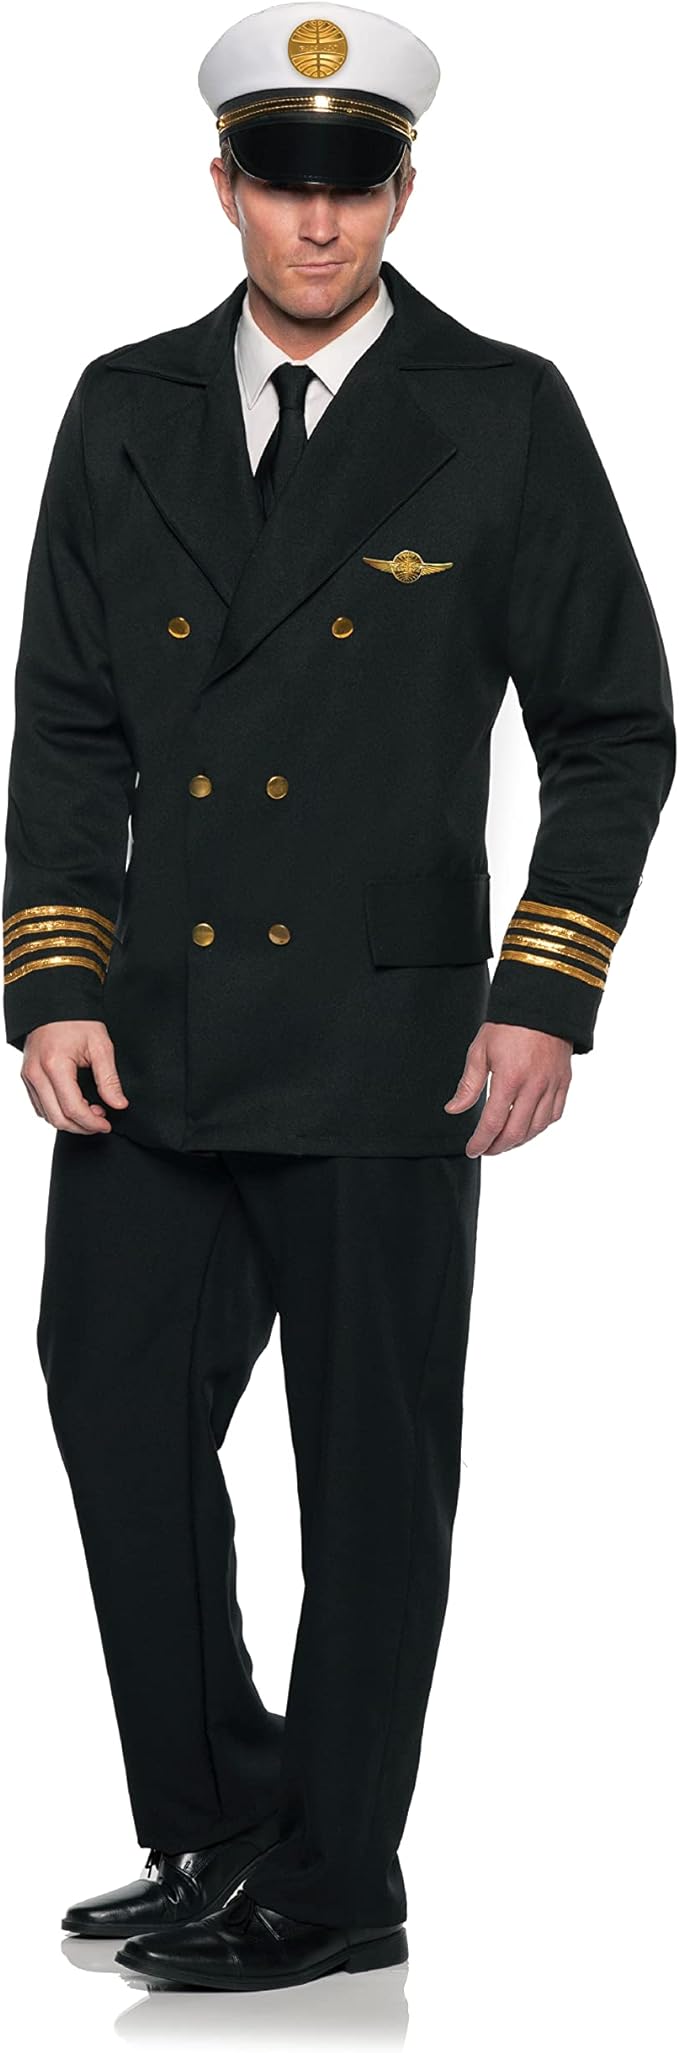 Officially Licensed PAN AM® Pilot Adult Costume